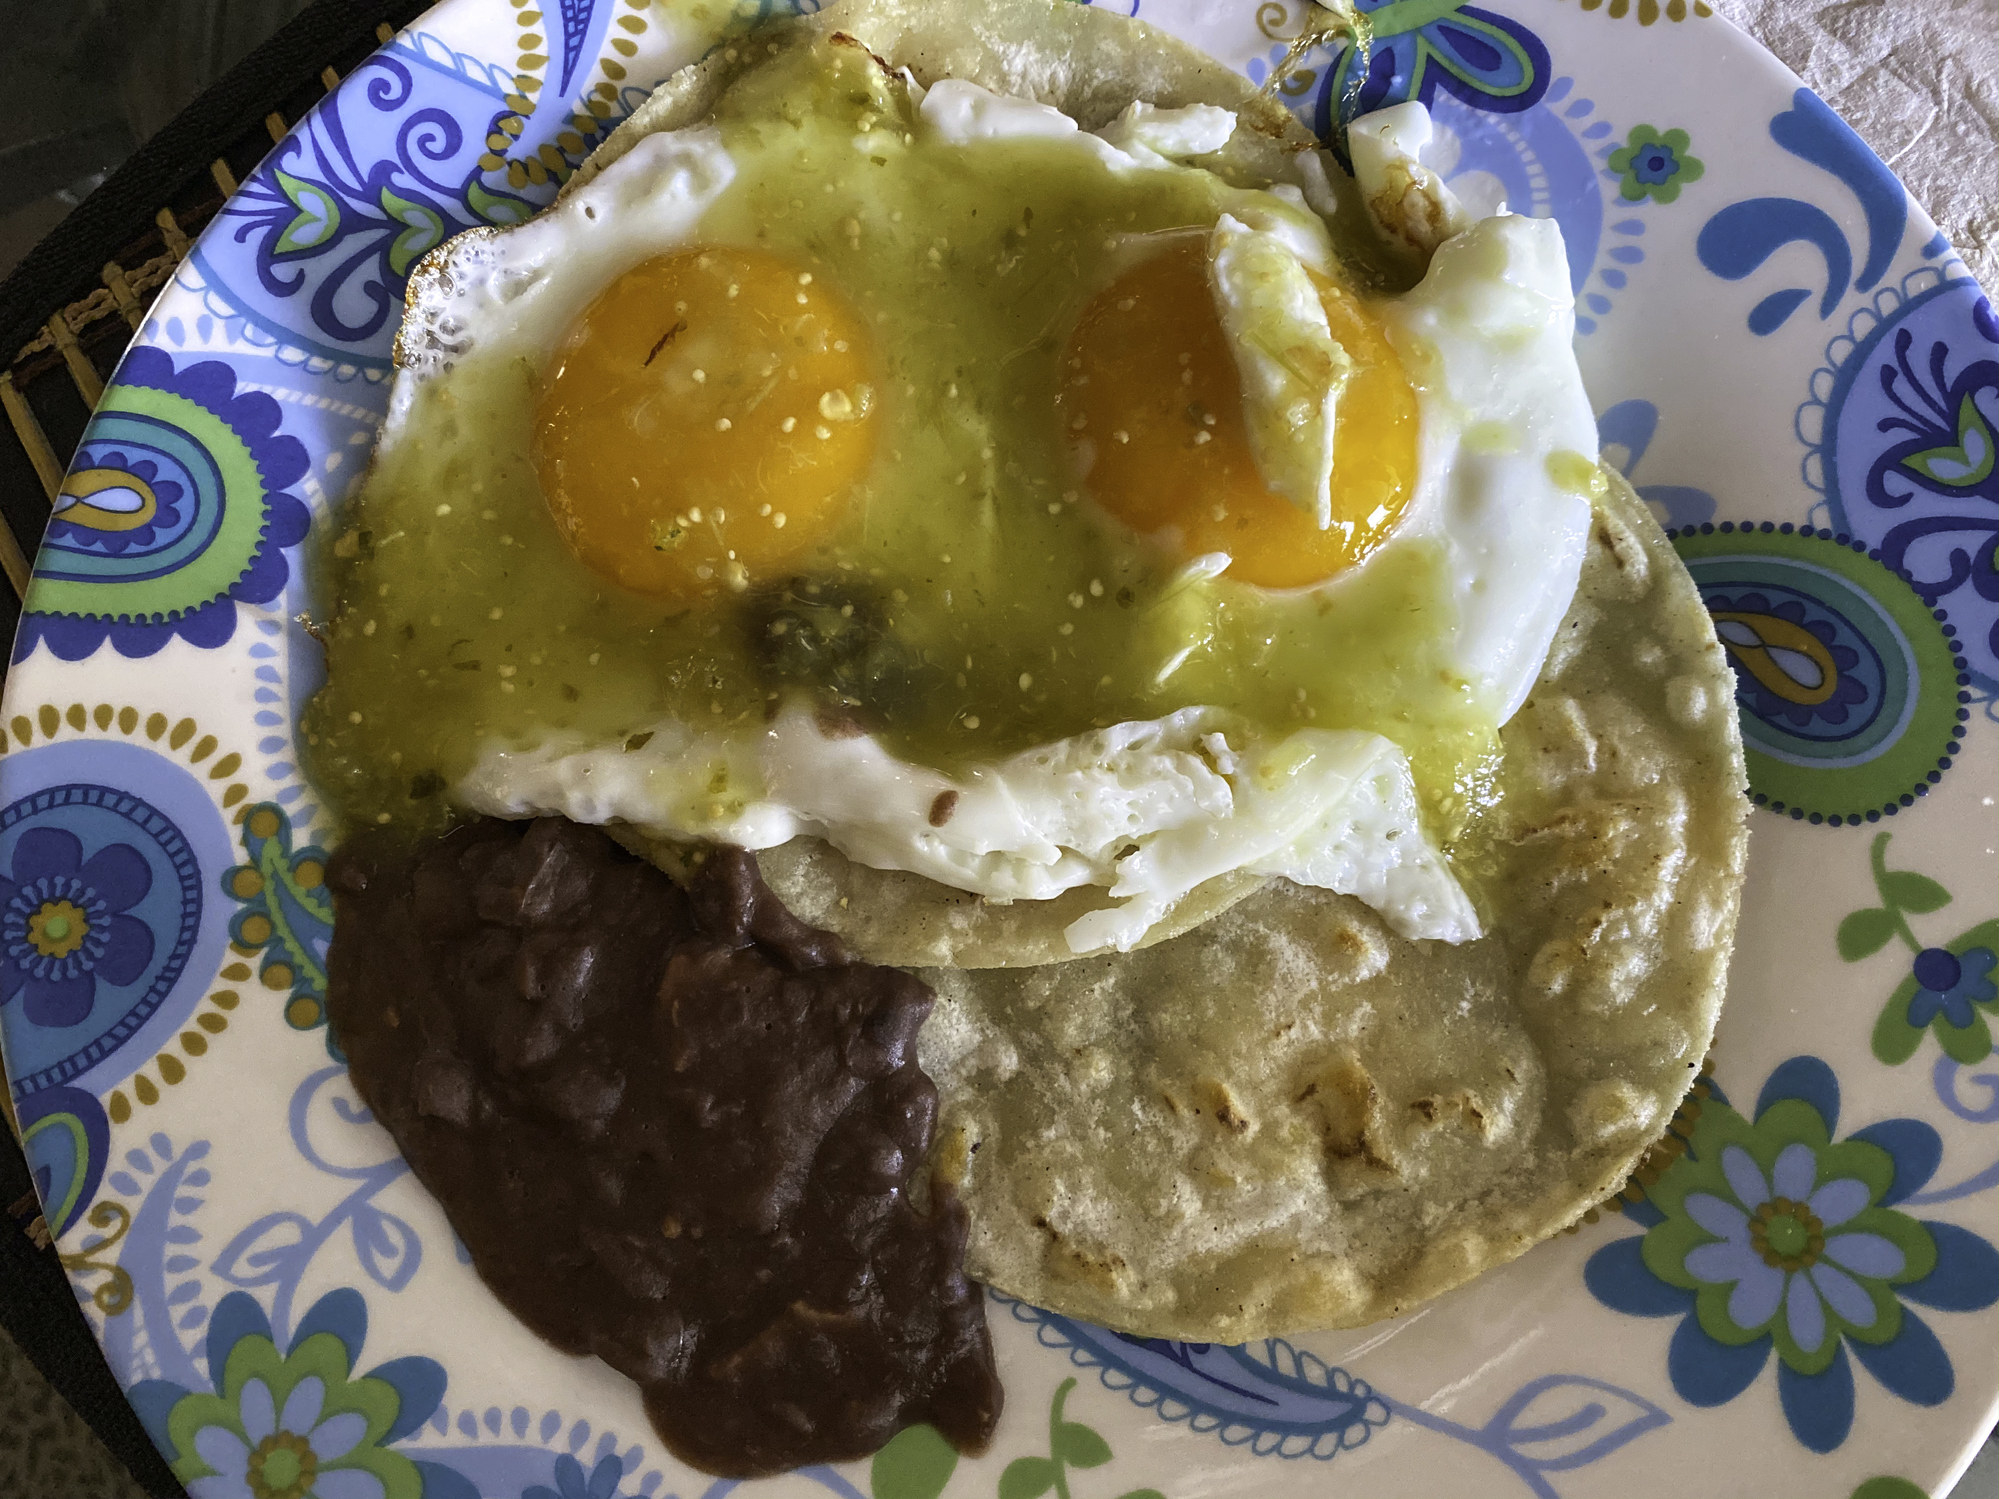 Huevos rancheros: sunny-side up eggs on a tortilla with black beans and salsa verde